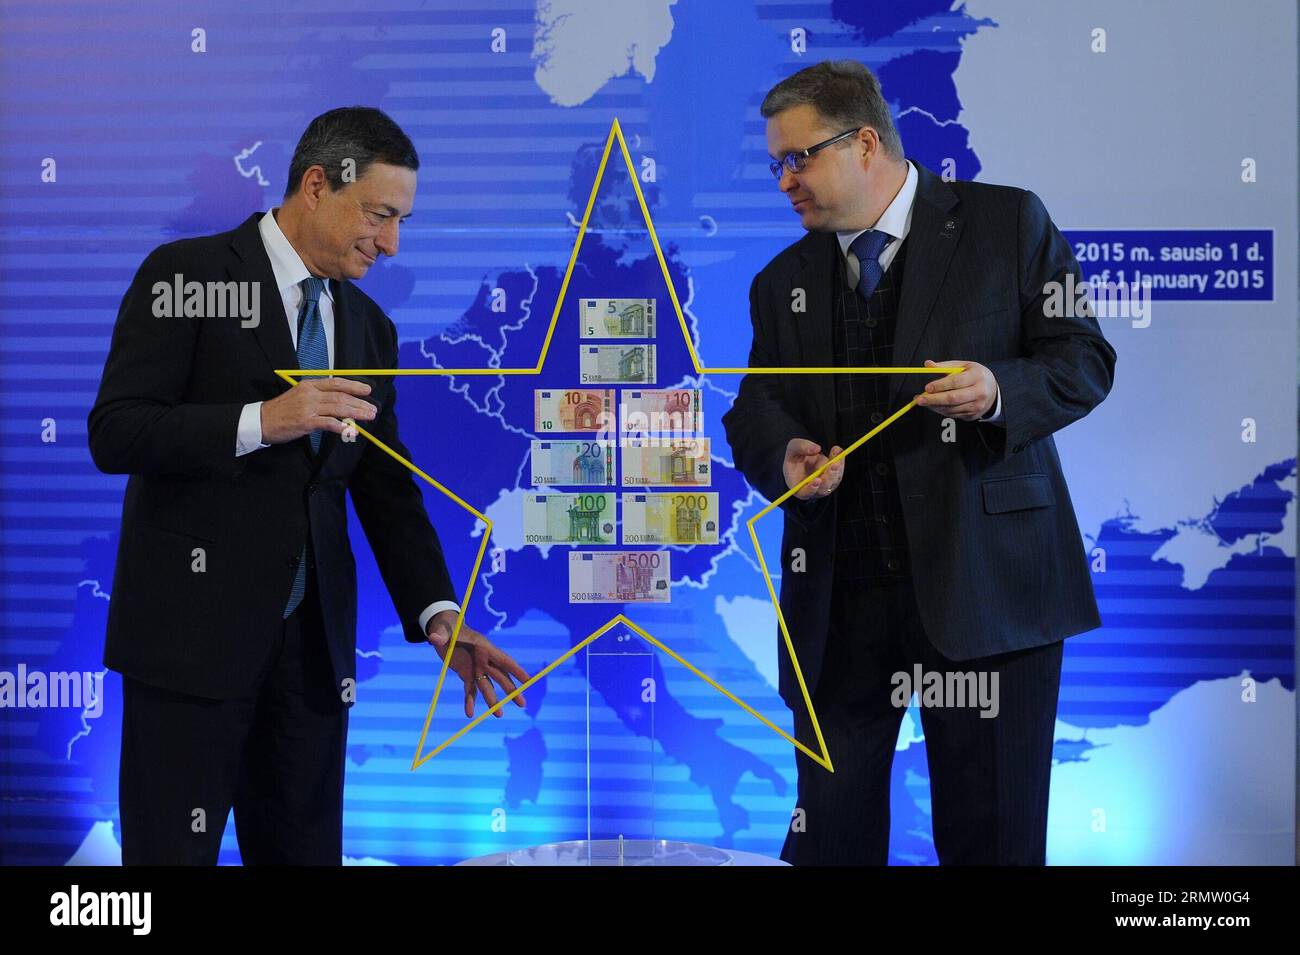 (140925) -- VILNIUS, Sept. 25, 2014 -- European Central Bank (ECB) s president Mario Draghi (L) hands over Euro Star to president of Lithuanian central bank Vitas Vasiliauskas in Vilnius, Lithuania, on Sept. 25, 2014. President of the ECB Mario Draghi handed over a Euro Star to chairman of Lithuania s Central Bank here on Thursday, a sign symbolizing Lithuania s membership in the euro area. ) (lmz) LUTHUANIA-VILNIUS-EURO STAR AlfredasxPliadis PUBLICATIONxNOTxINxCHN   Vilnius Sept 25 2014 European Central Bank ECB S President Mario Draghi l Hands Over Euro Star to President of Lithuanian Centra Stock Photo